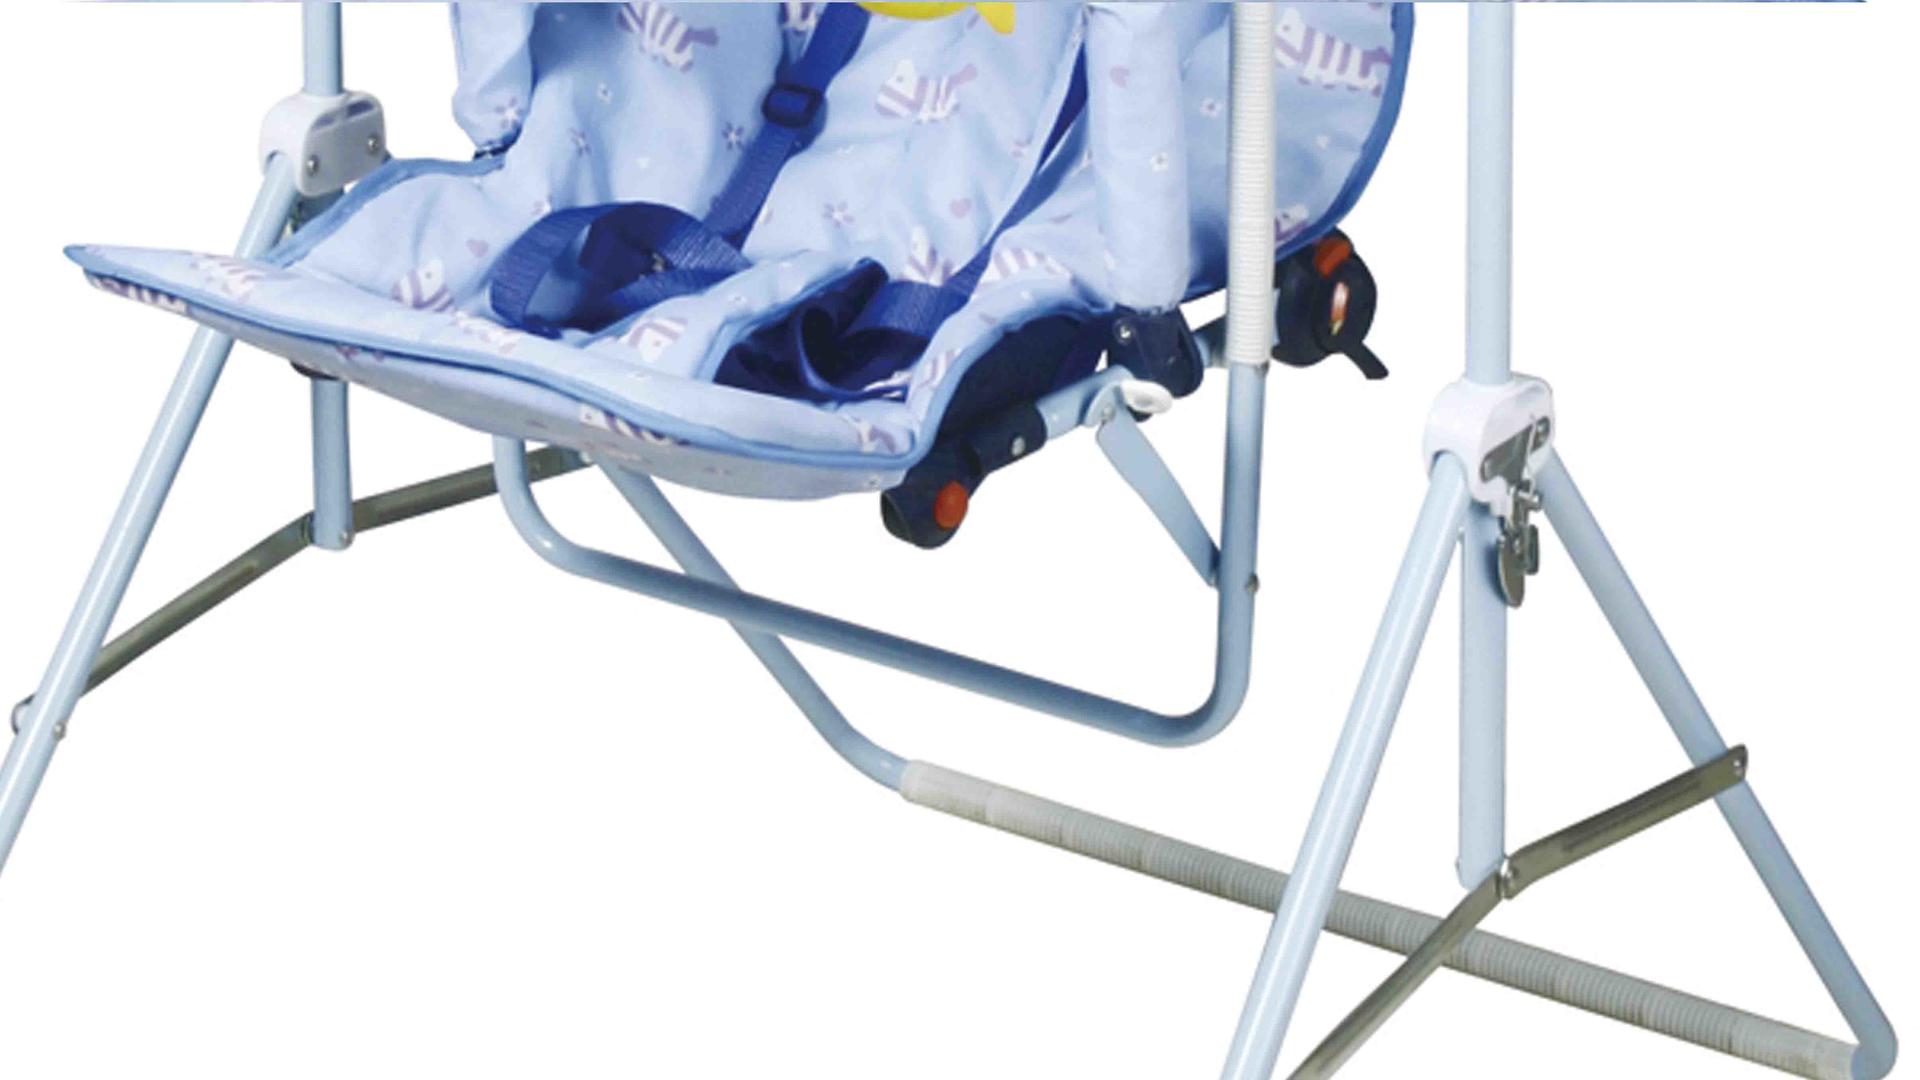 Aoqi best baby swing chair design for babys room